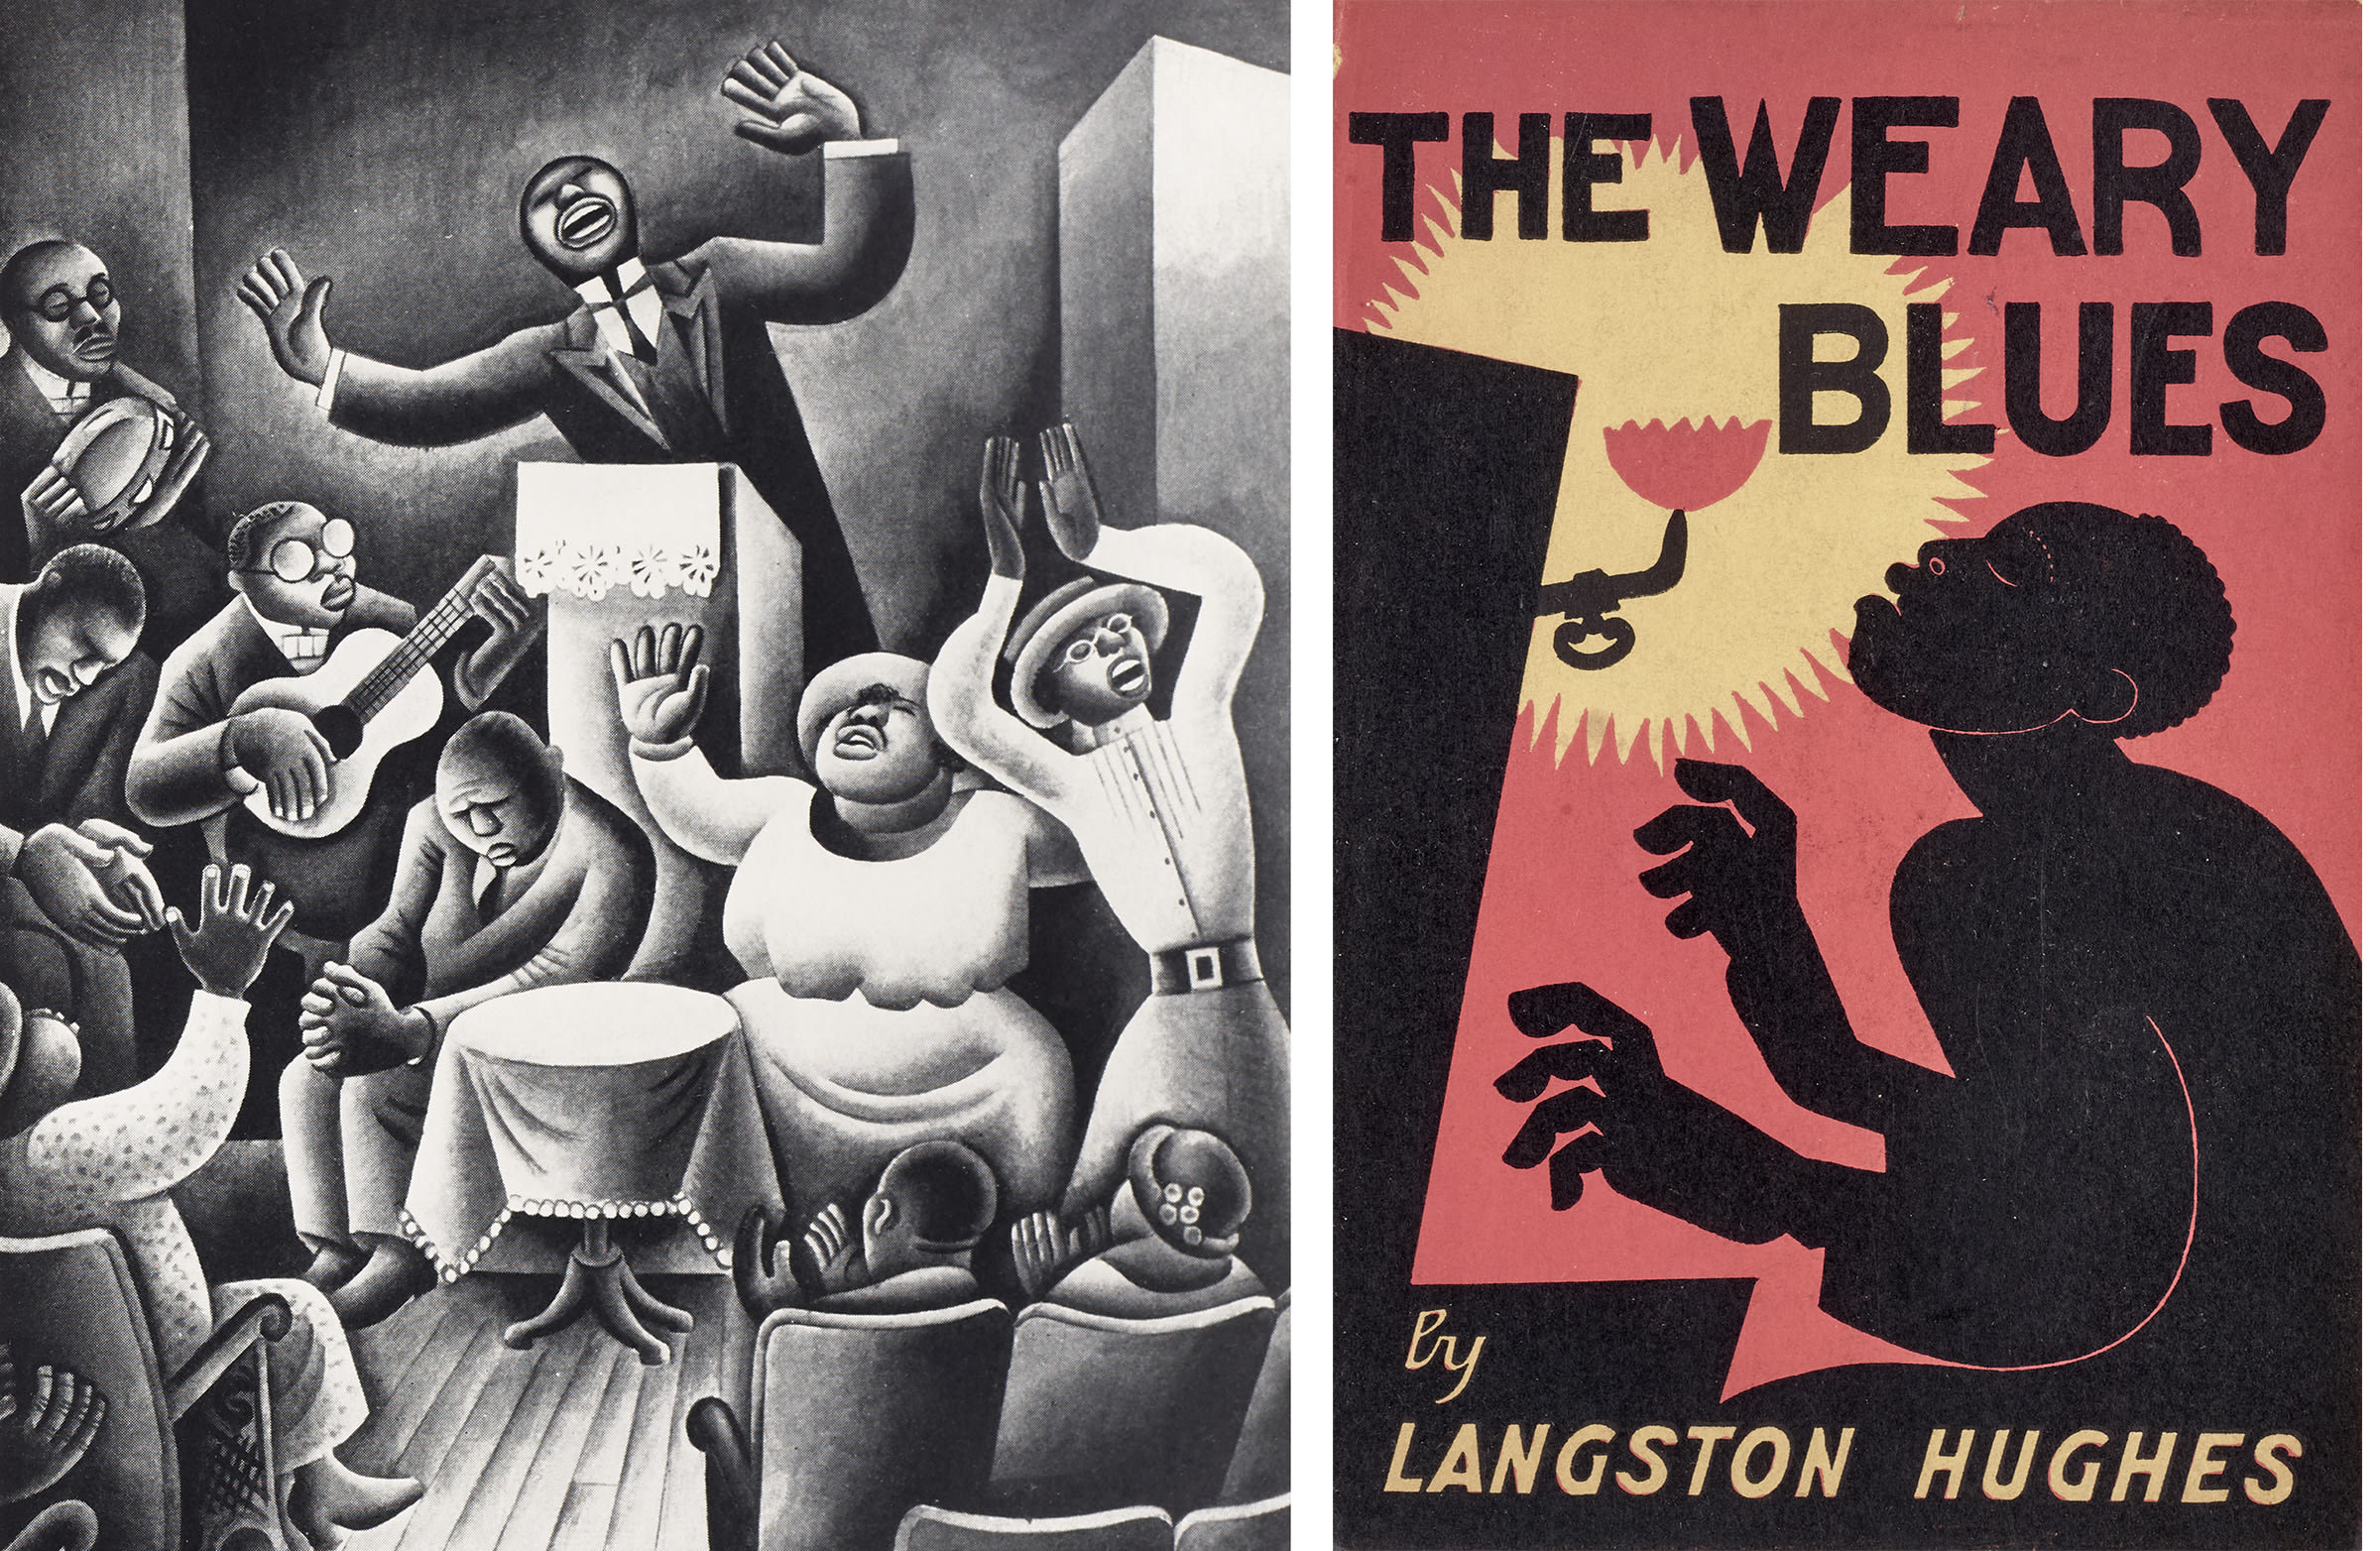 Left: Miguel Covarrubias, Negro Drawing, 1927. Right: Cover of The Weary Blues (1926) by Langston Hughes and Miguel Covarrubias. Both images courtesy of the Wolfsonian – Florida International University.